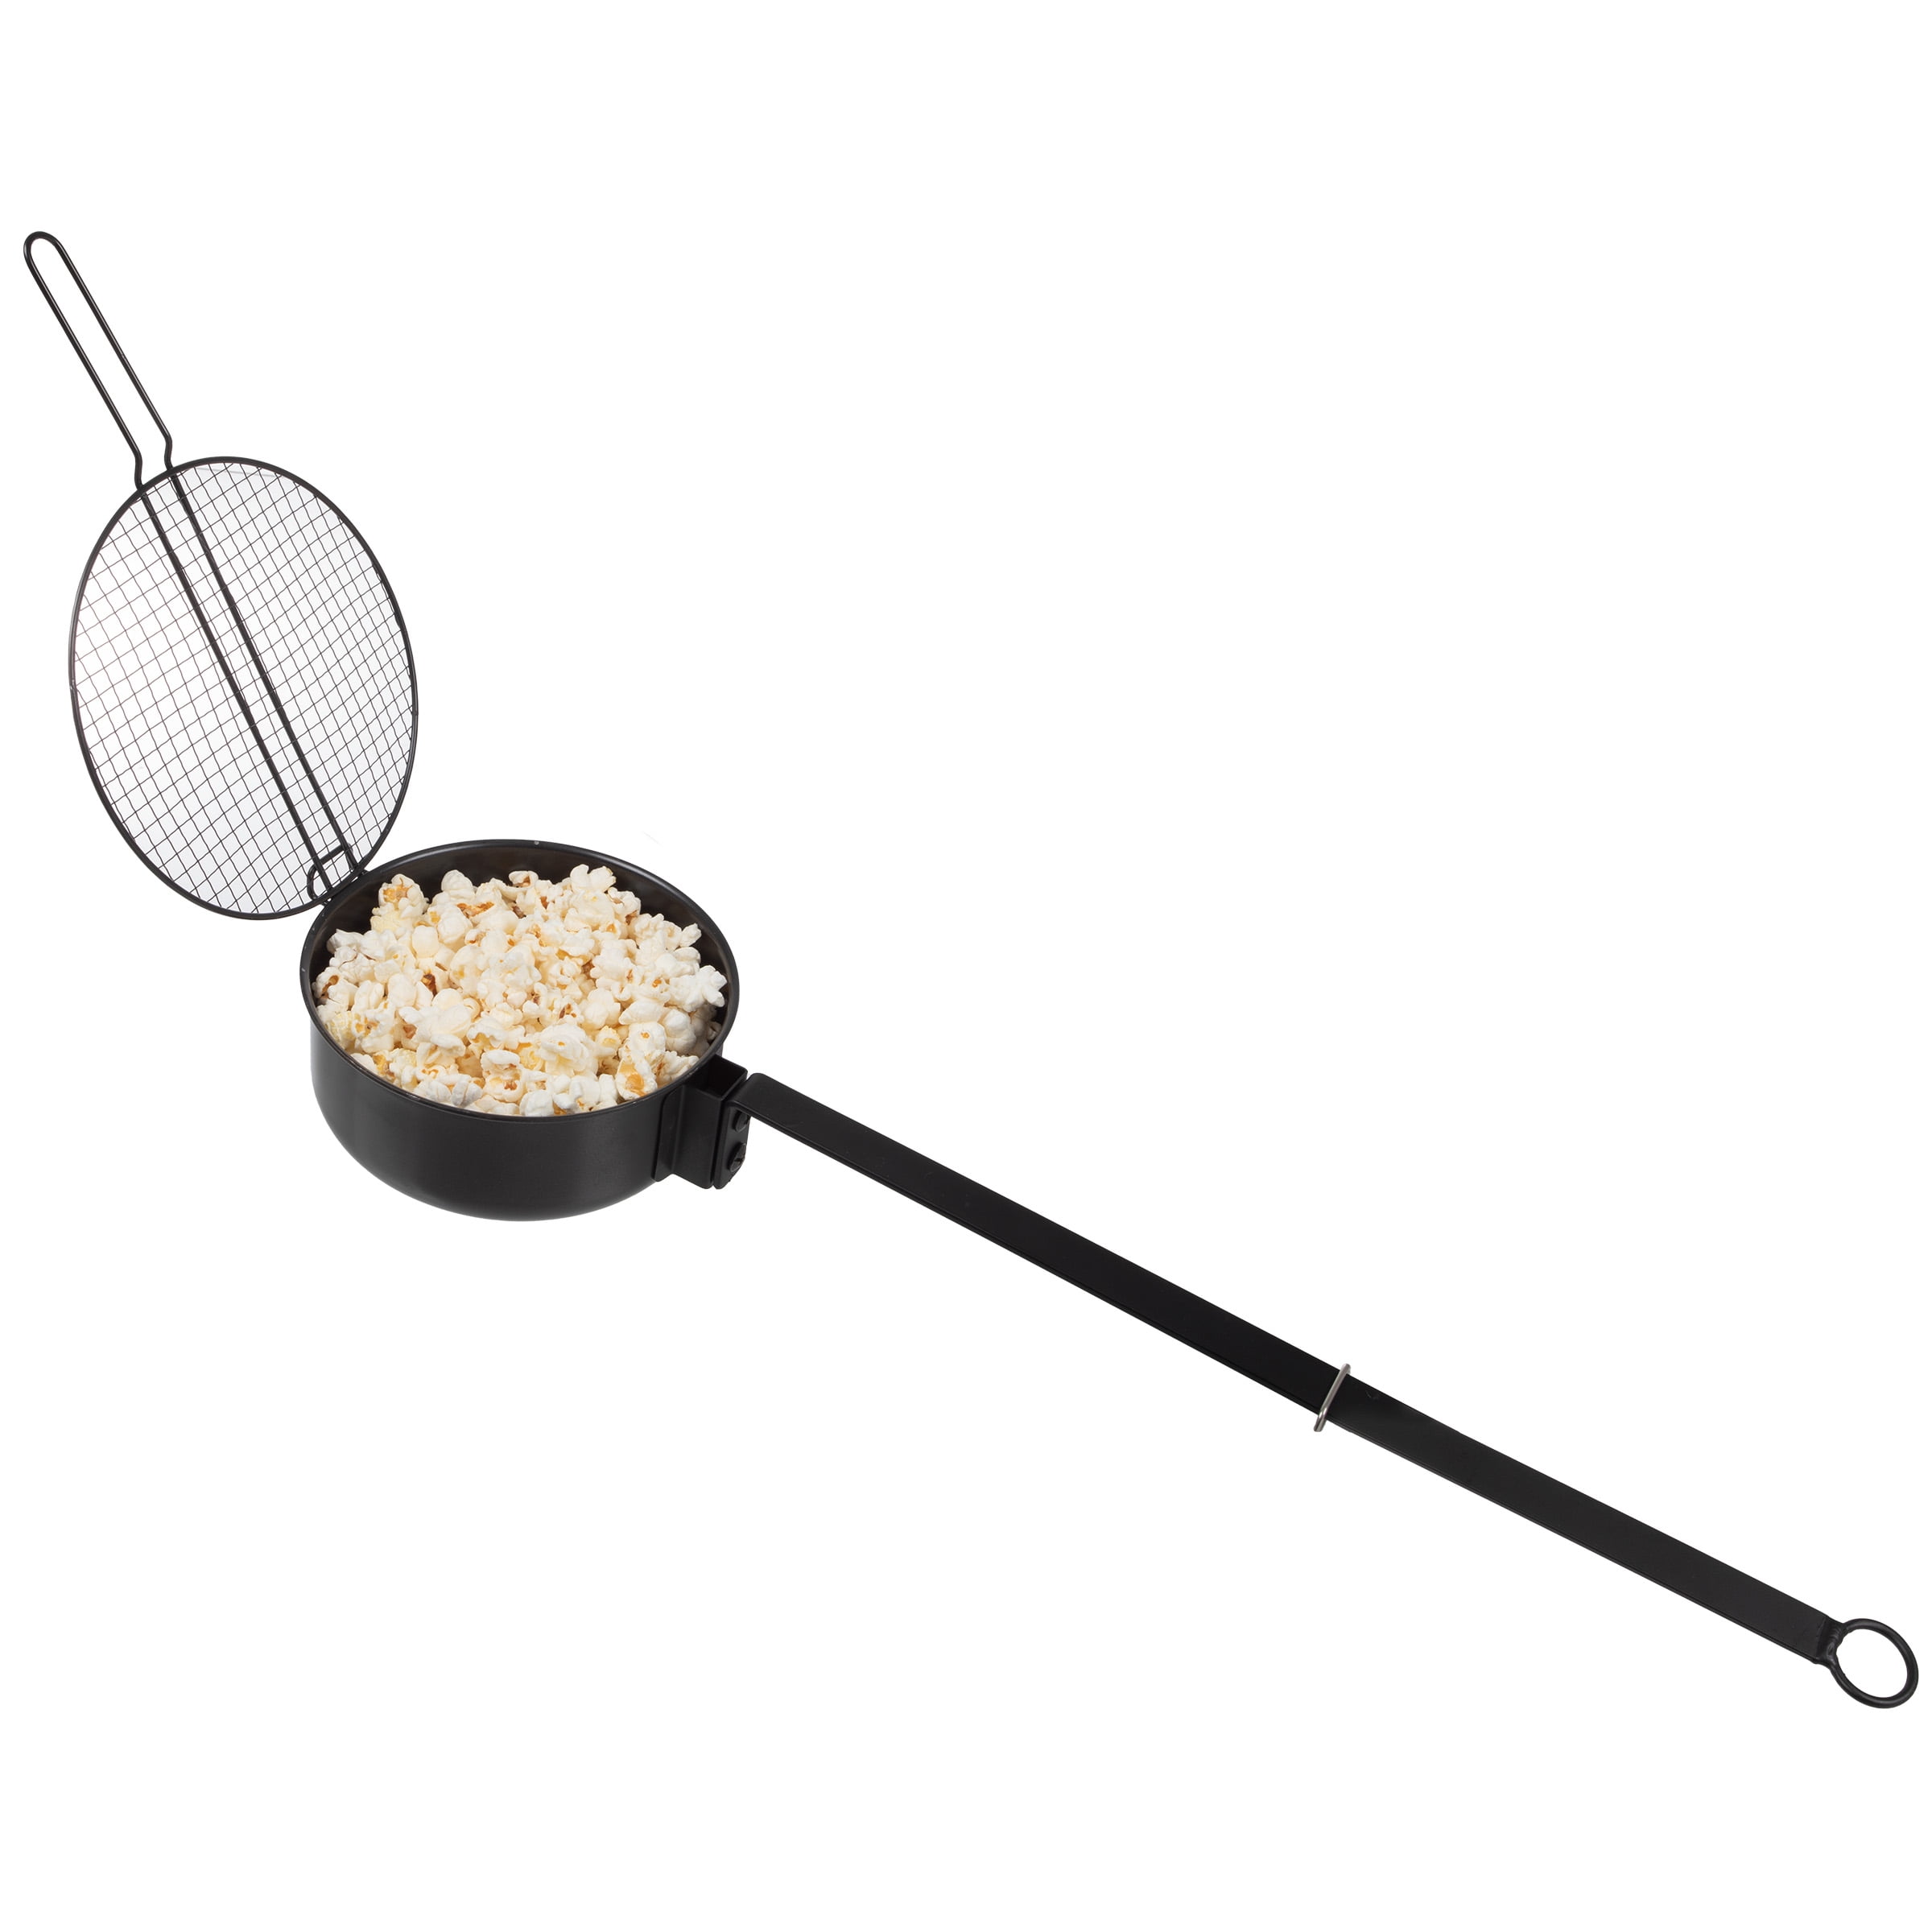 Great Northern 3.5 qt. Campfire Popcorn Popper - Old Fashioned Popcorn Maker  with Nonstick Finish and Extended Handle - Black 83-DT6156 - The Home Depot